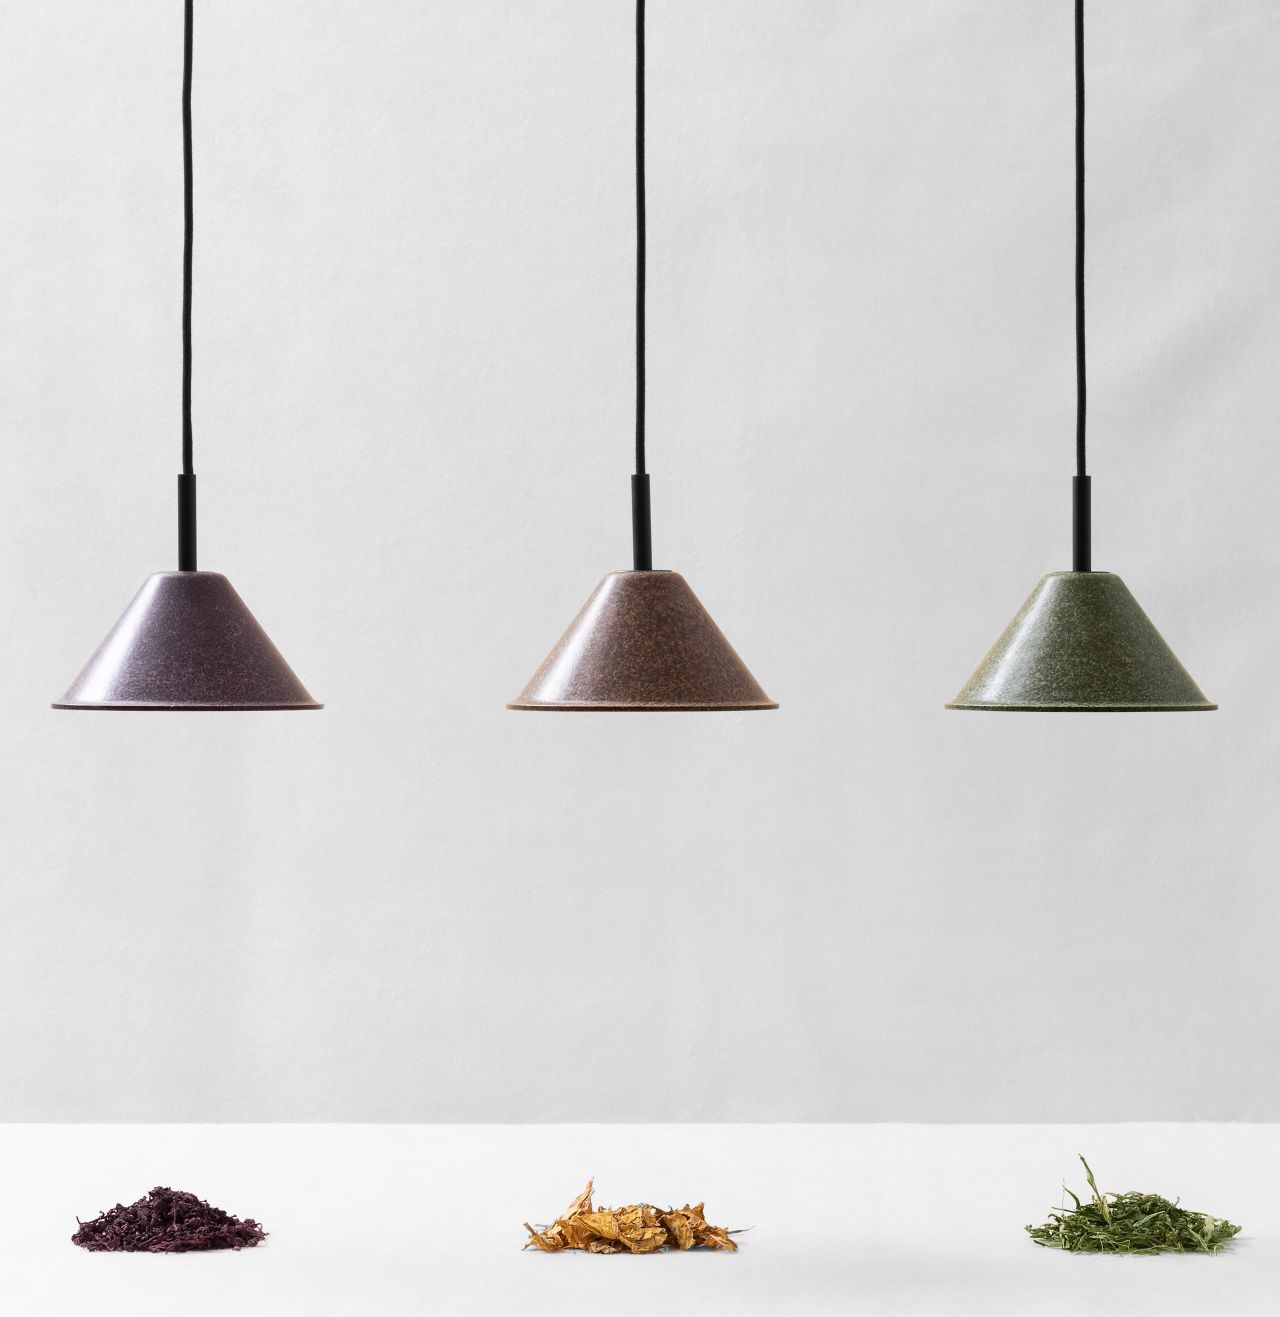 Italian design firm High Society makes plant-based lighting from the byproducts of hemp, tobacco and wine production.